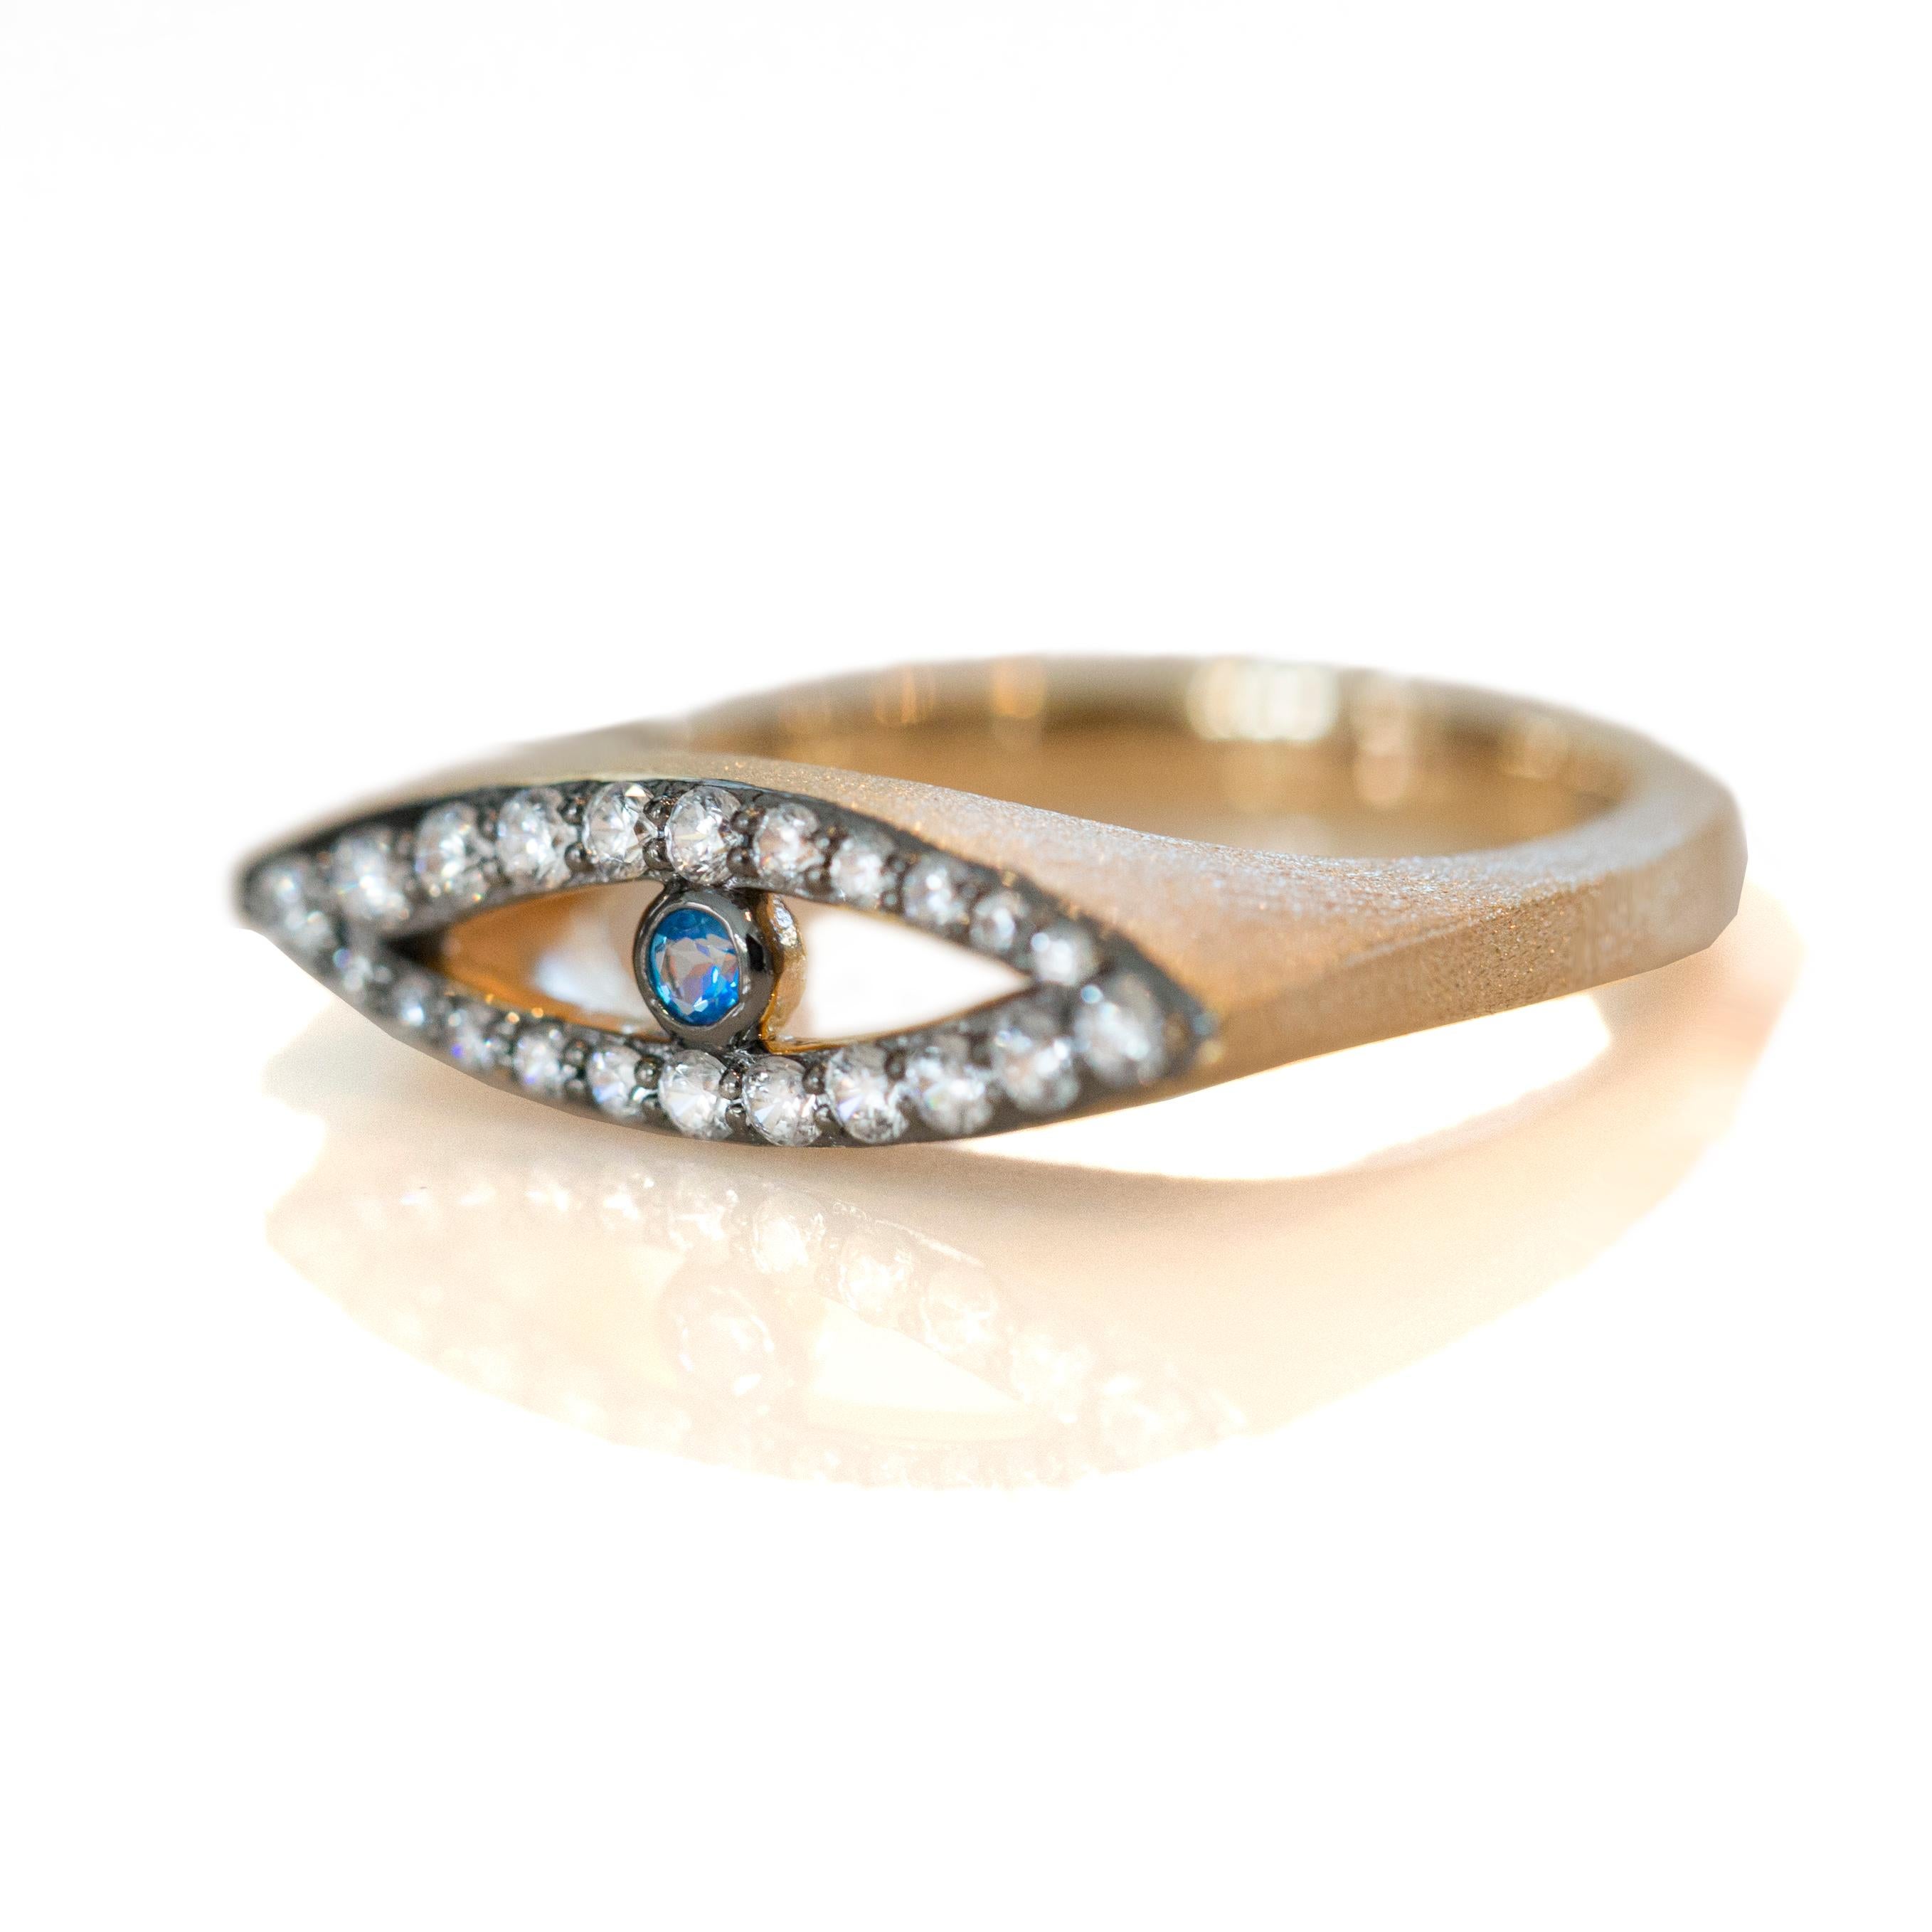 The eye symbol used across cultures for protection and wading away evil. Sa'mma protective eye ring is a reminder of the higher powers watching over us. Hand crafted in vermeil gold, clear zircon and blue or smokey topaz center. 